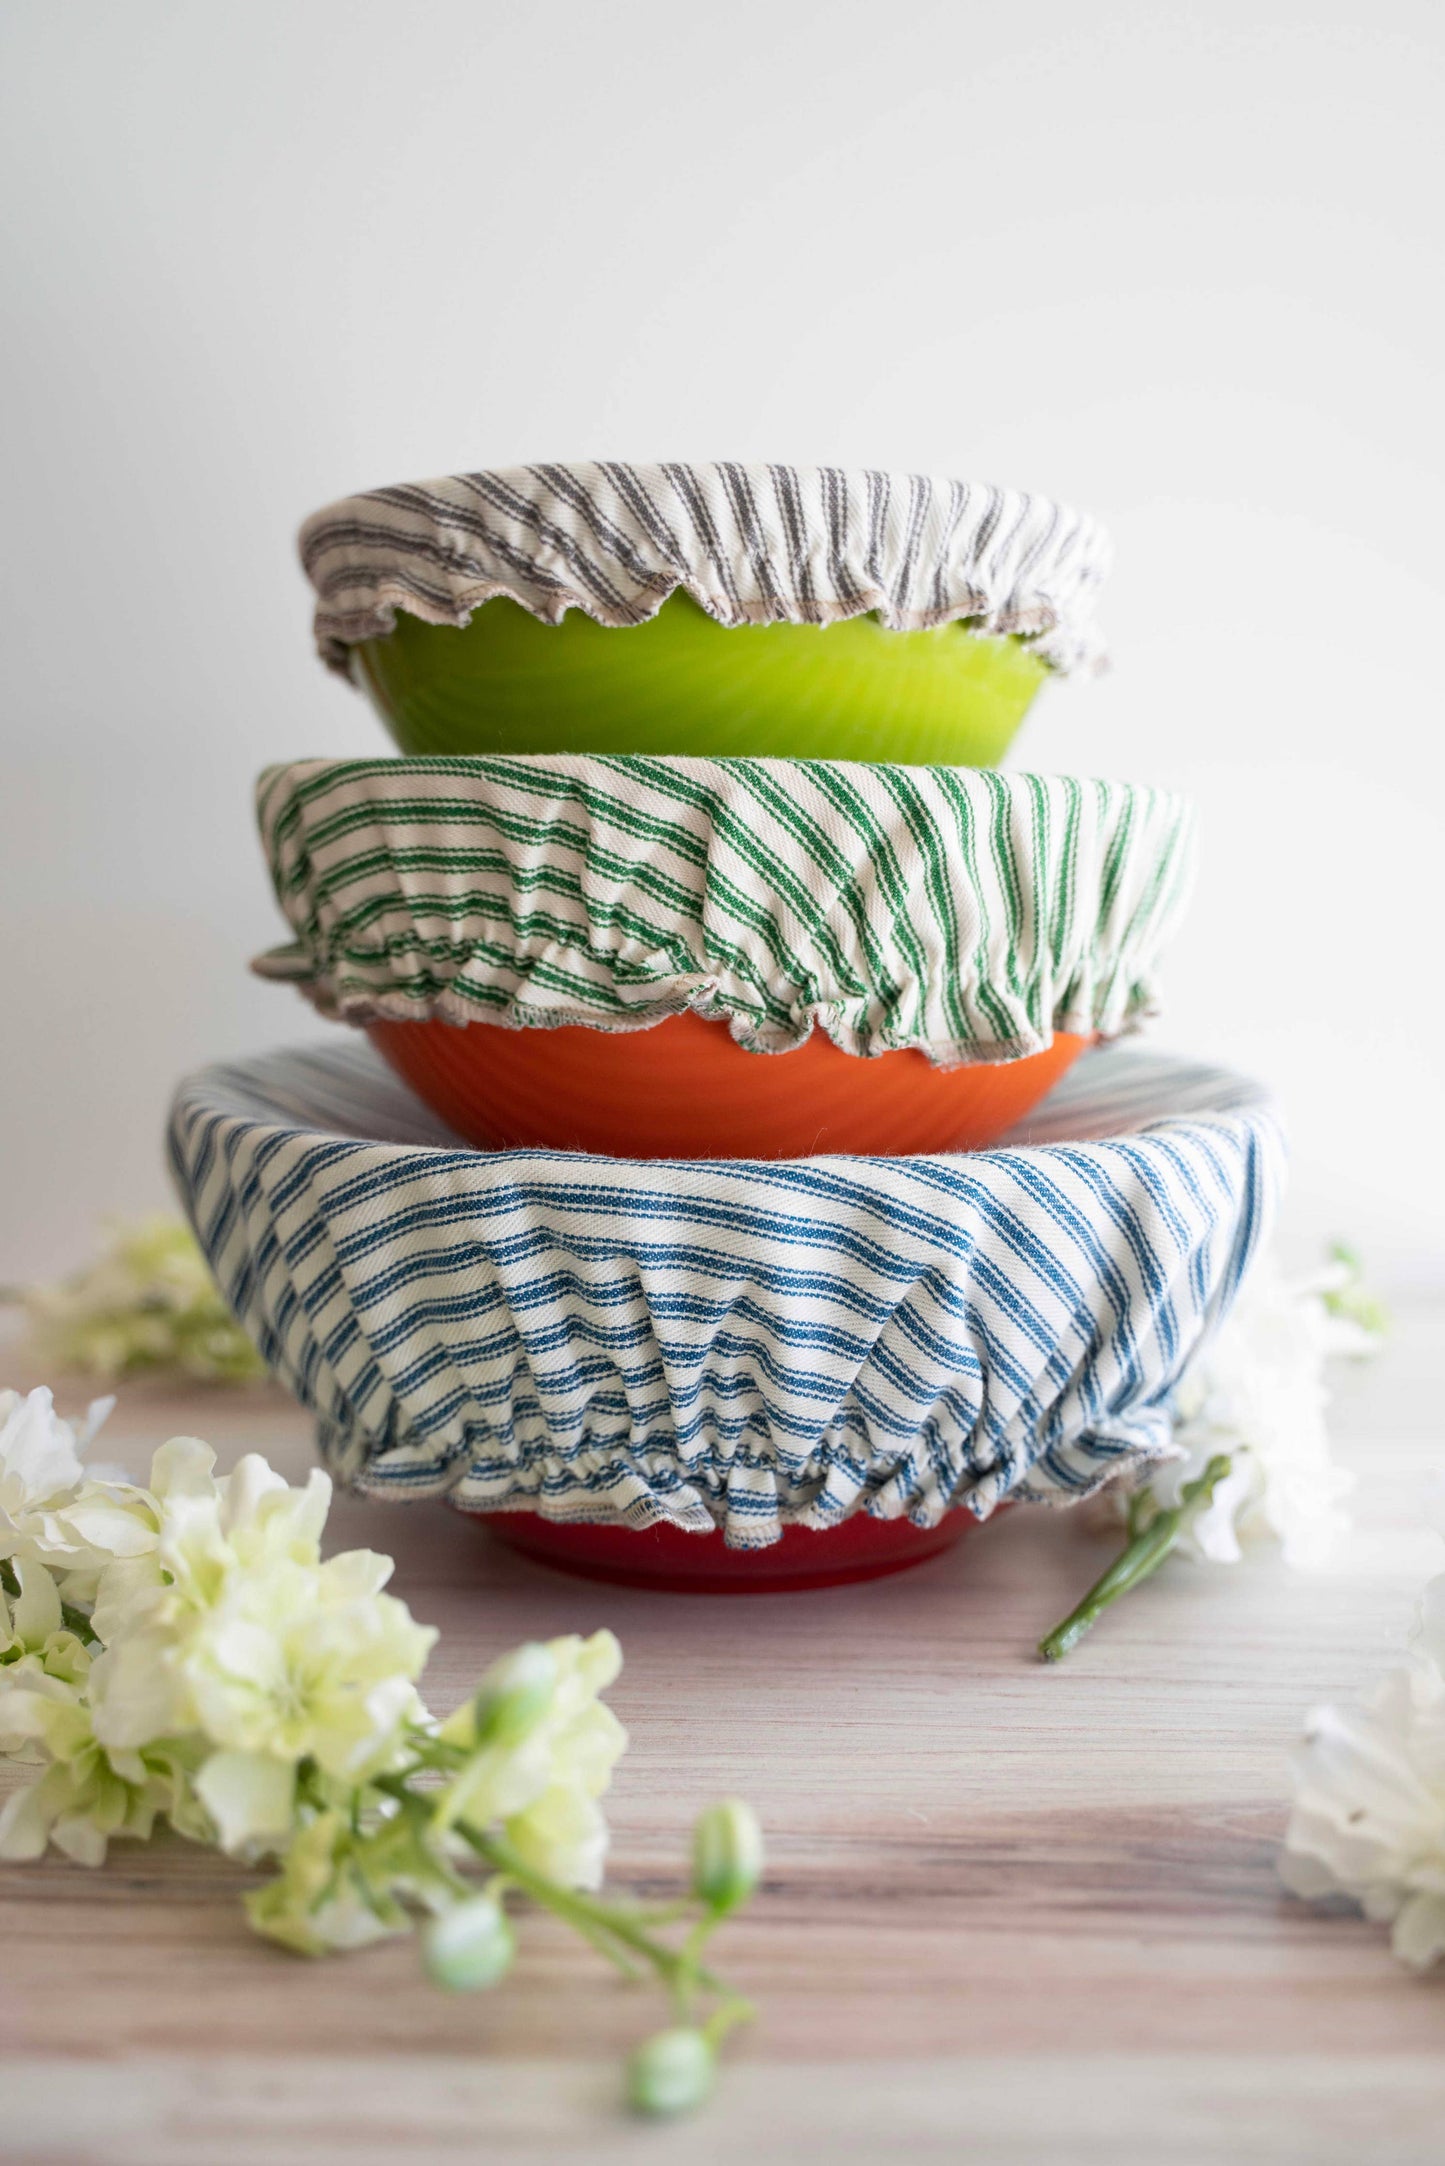 Dot and Army - Ticking Stripes Reusable Bowl Covers, set of three